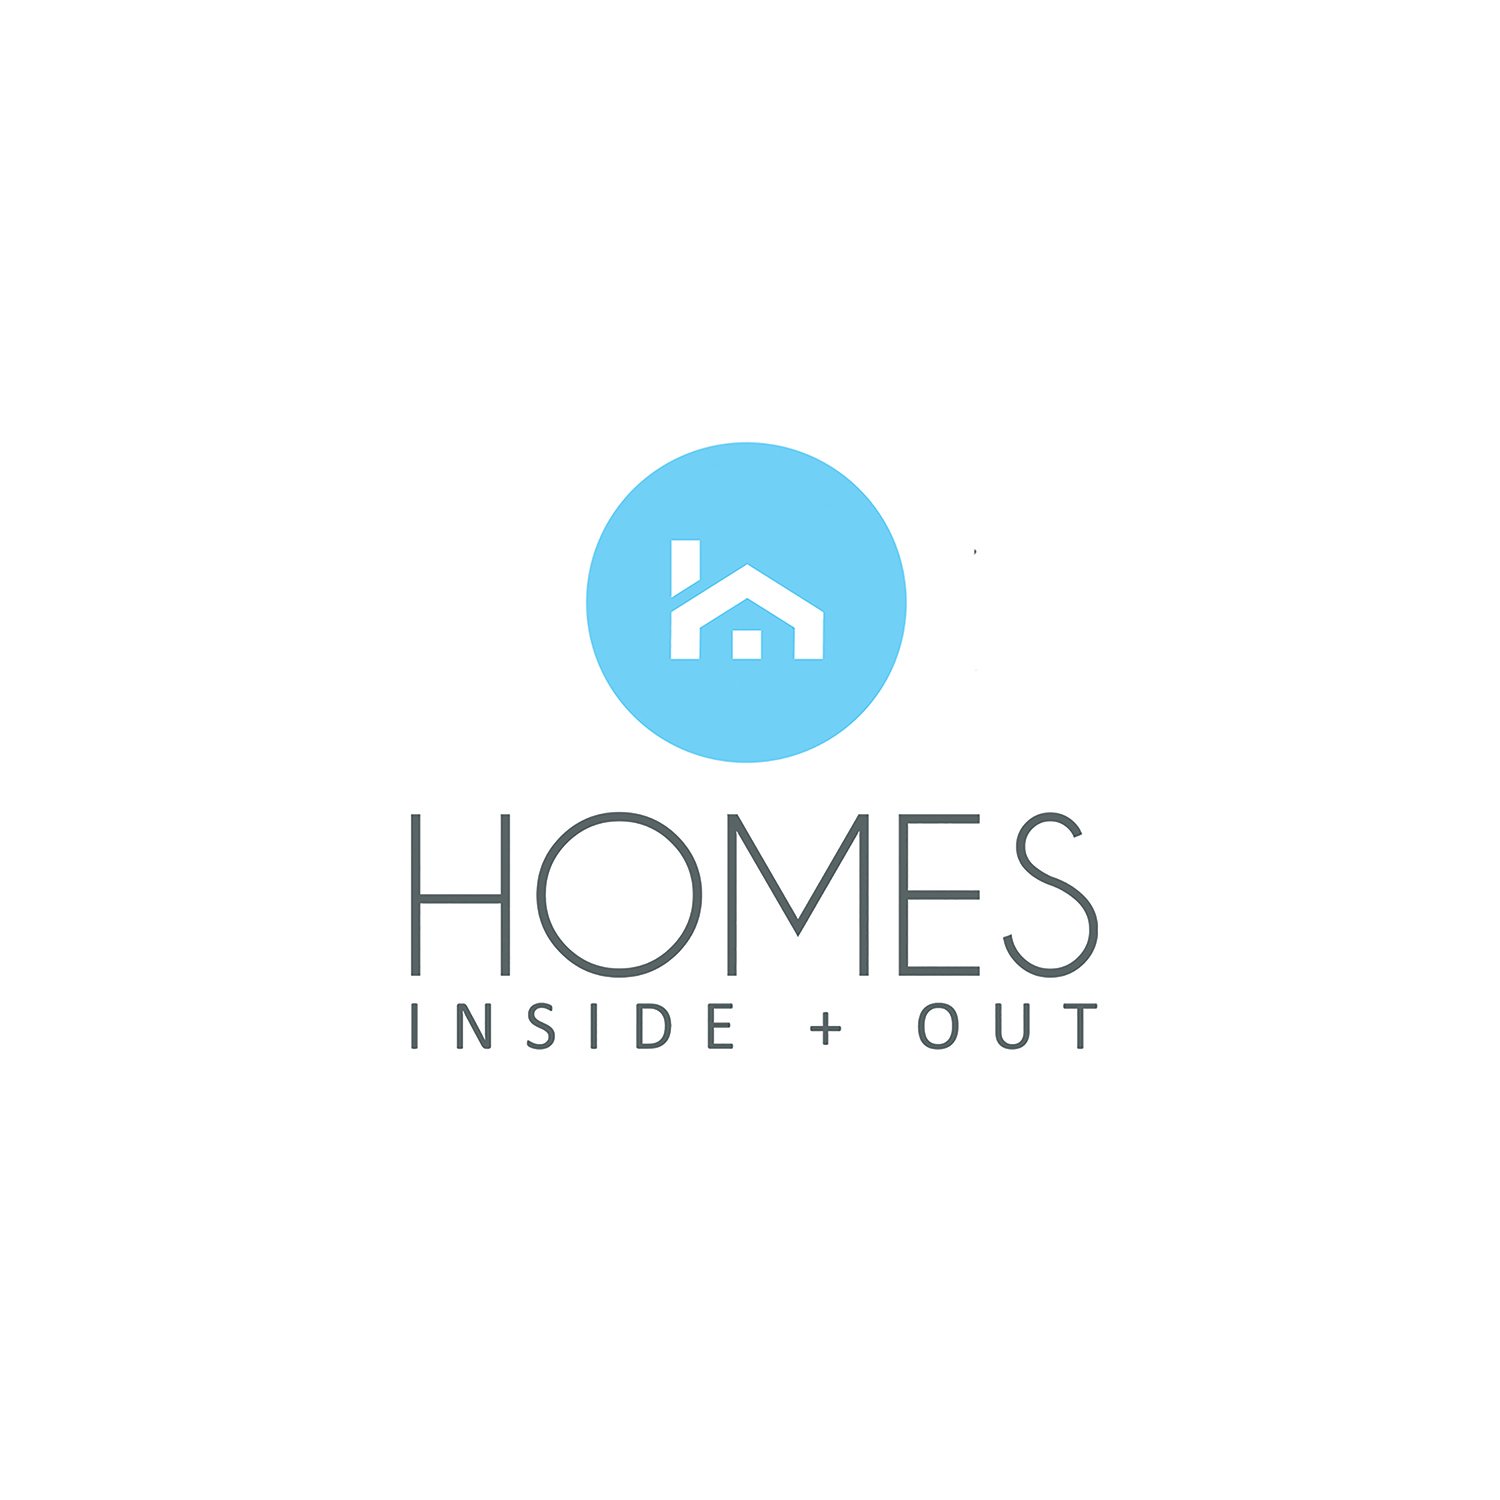  HOMES: INSIDE + OUT